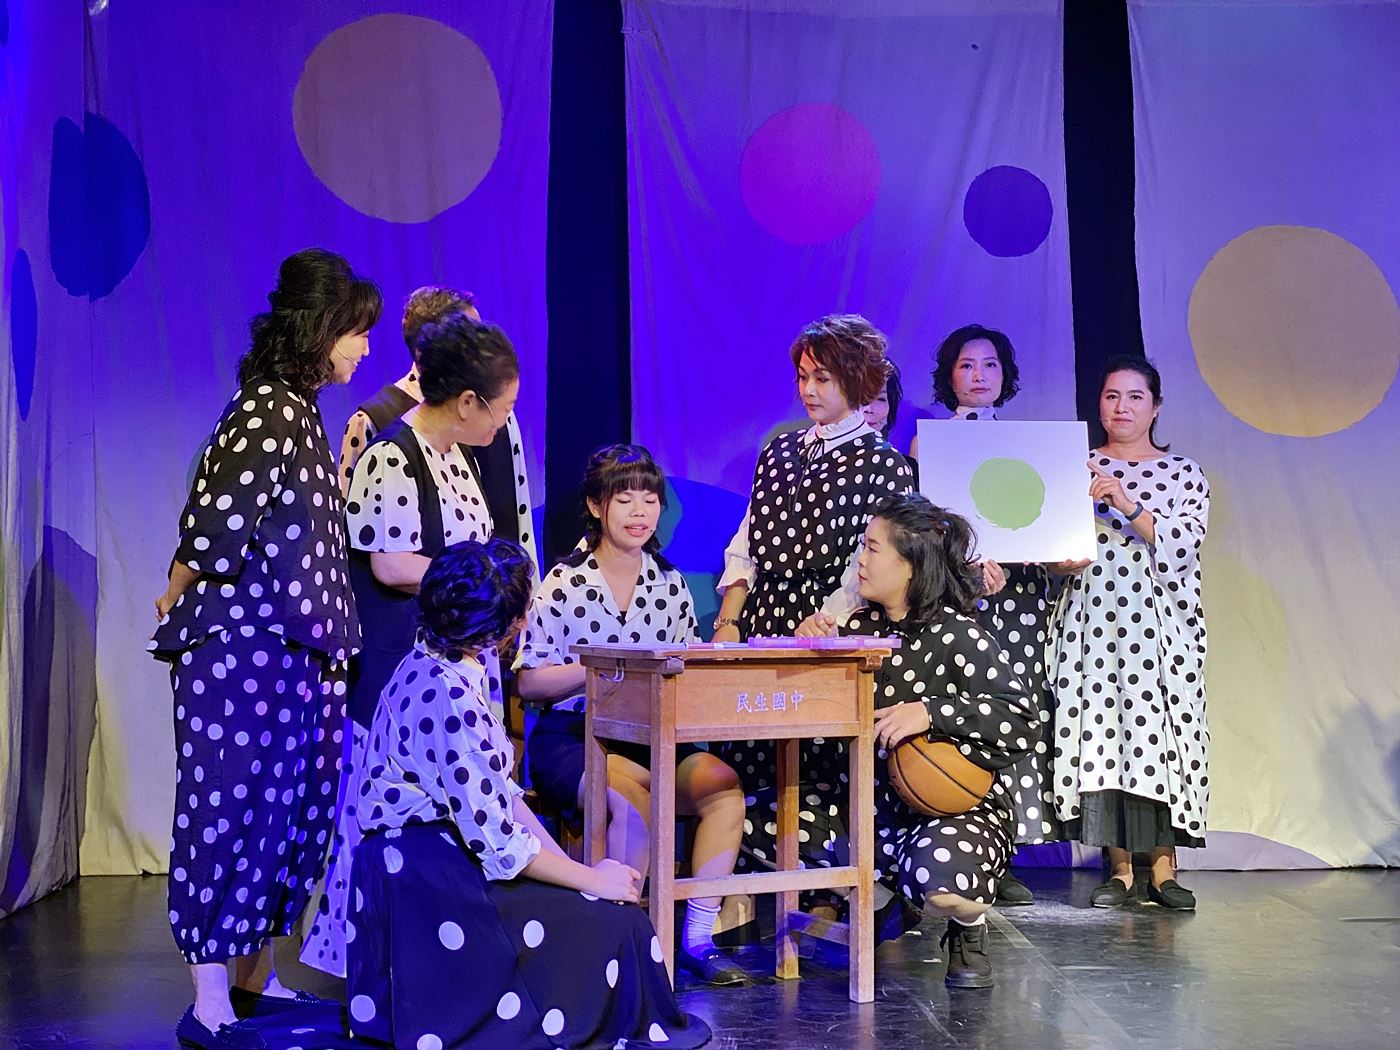 The live performance of the stage play "Building Dreams". (Photo / Provided by the Chiayi City Government)